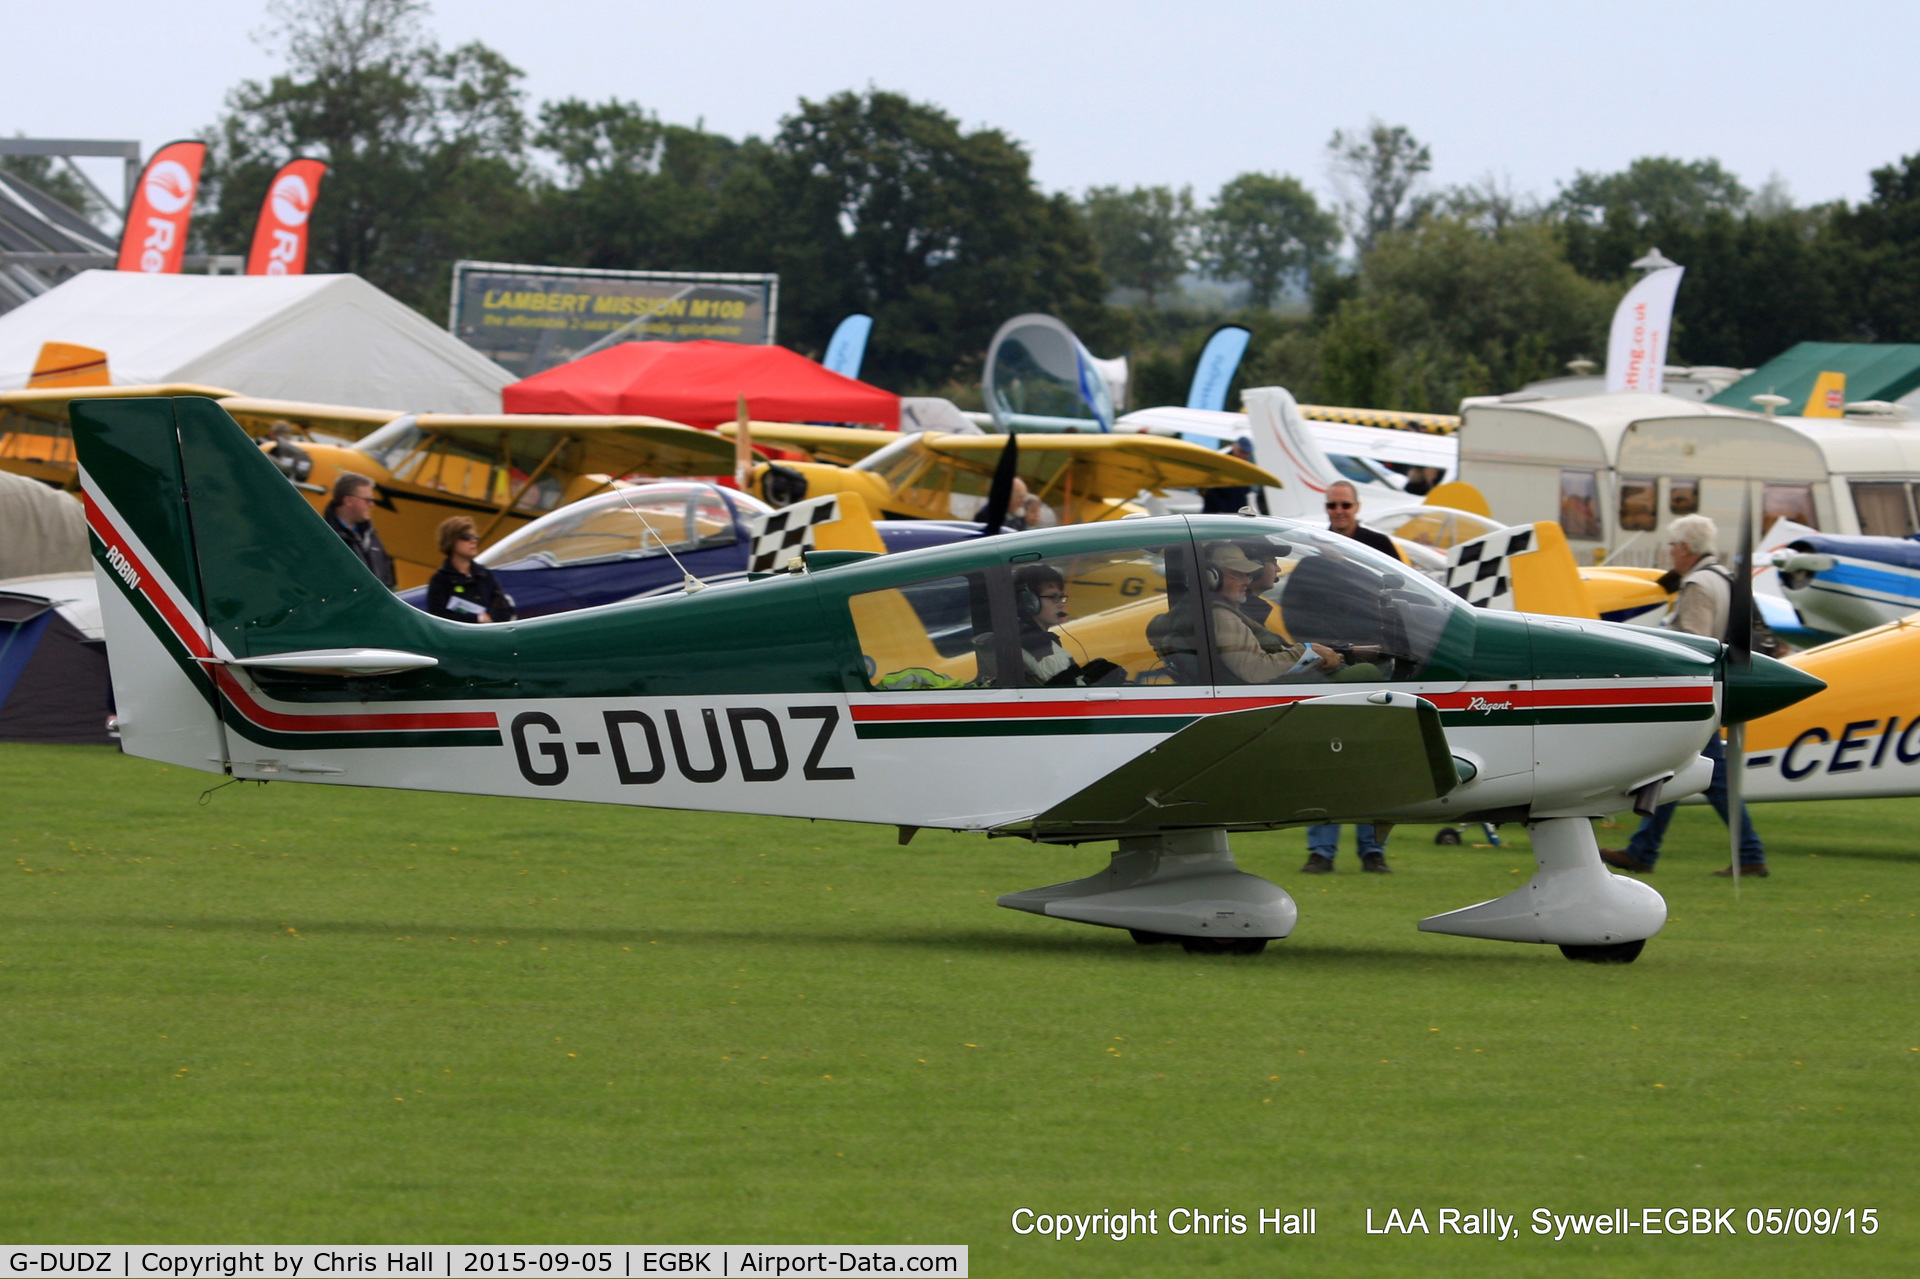 G-DUDZ, 1997 Robin DR-400-180 Regent Regent C/N 2367, at the LAA Rally 2015, Sywell